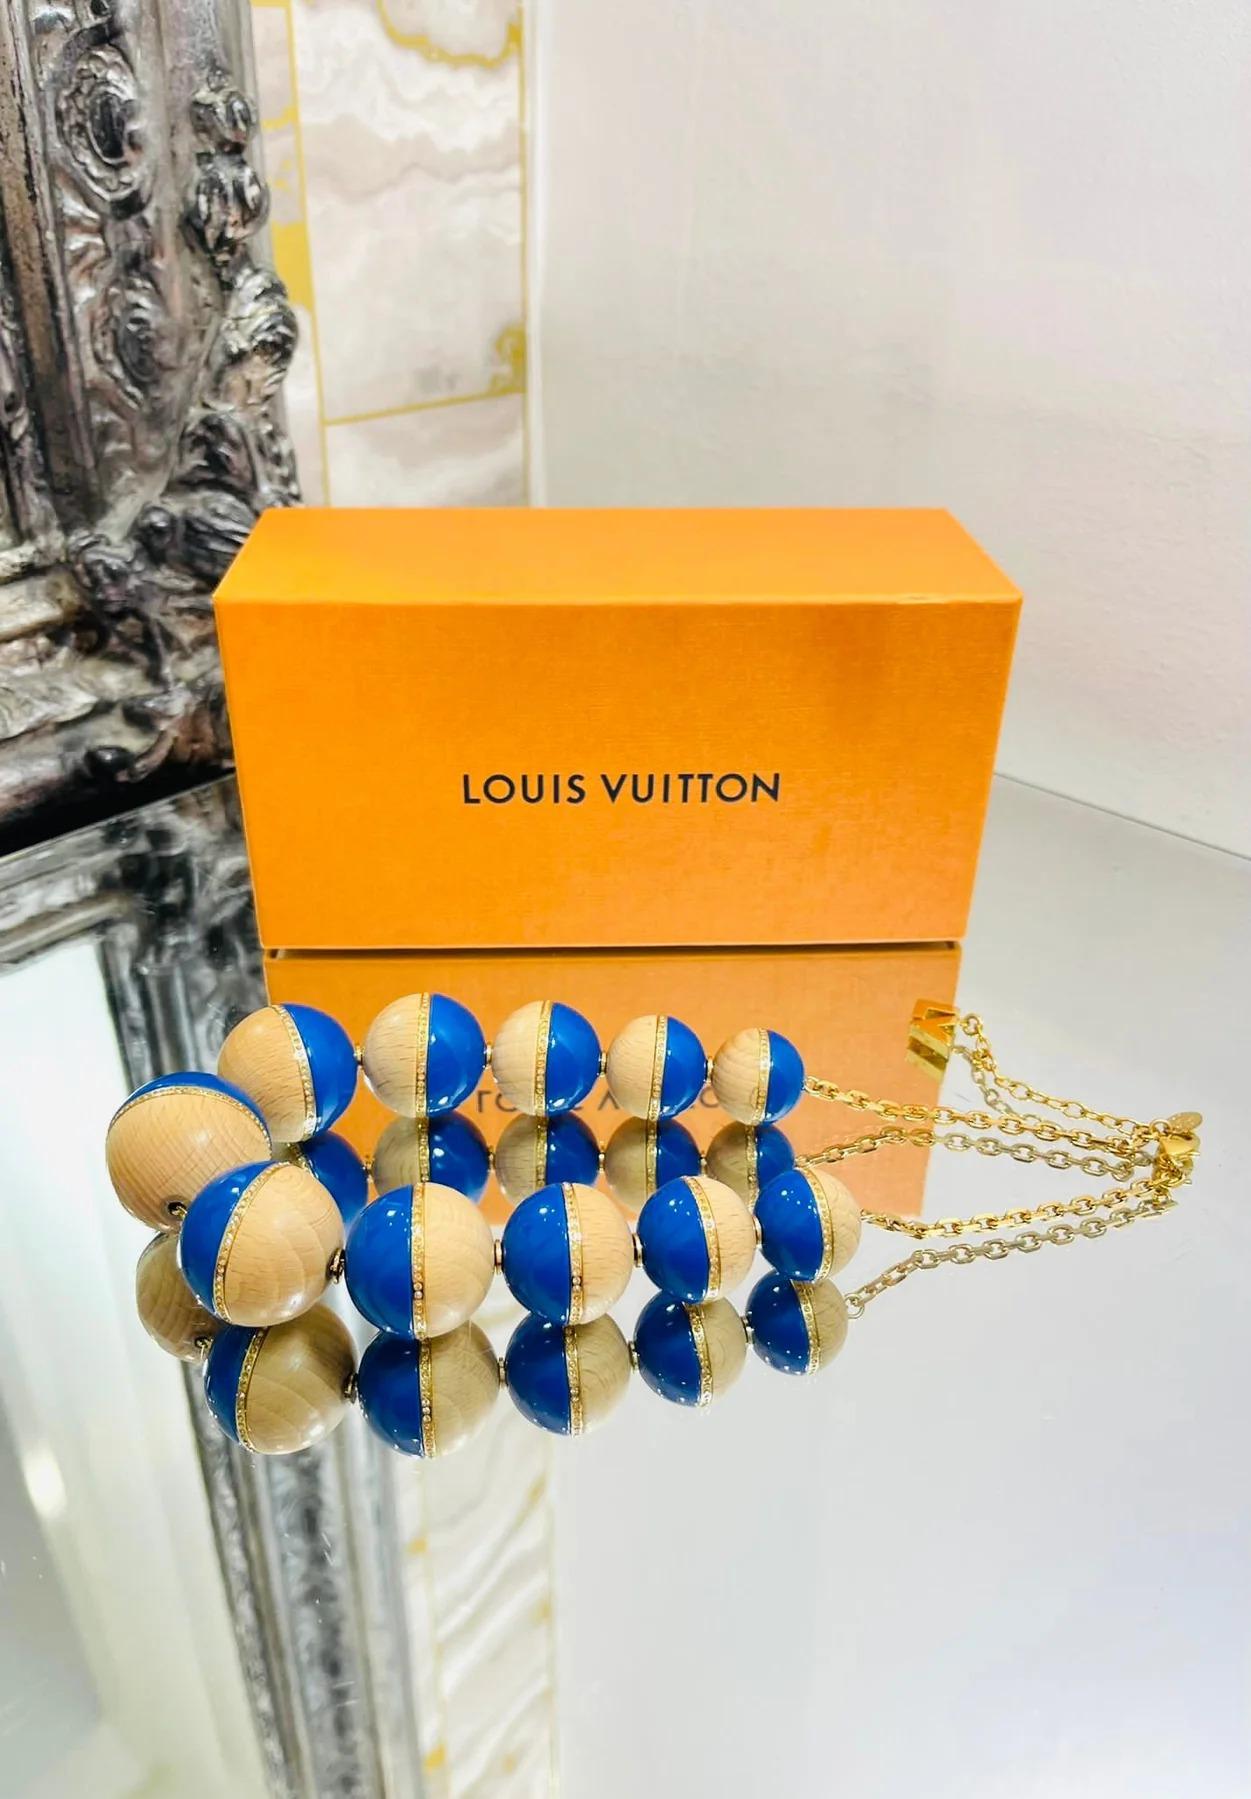 Louis Vuitton Crystal, Wood & Resin Beaded Necklace

Over sized in blue resin, wood with crystal embellishments and gold chain. Lobster clasp closure with dangling 'LV' logo.

Additional information:
Size – One Size 
Composition- Crystal, Wood,